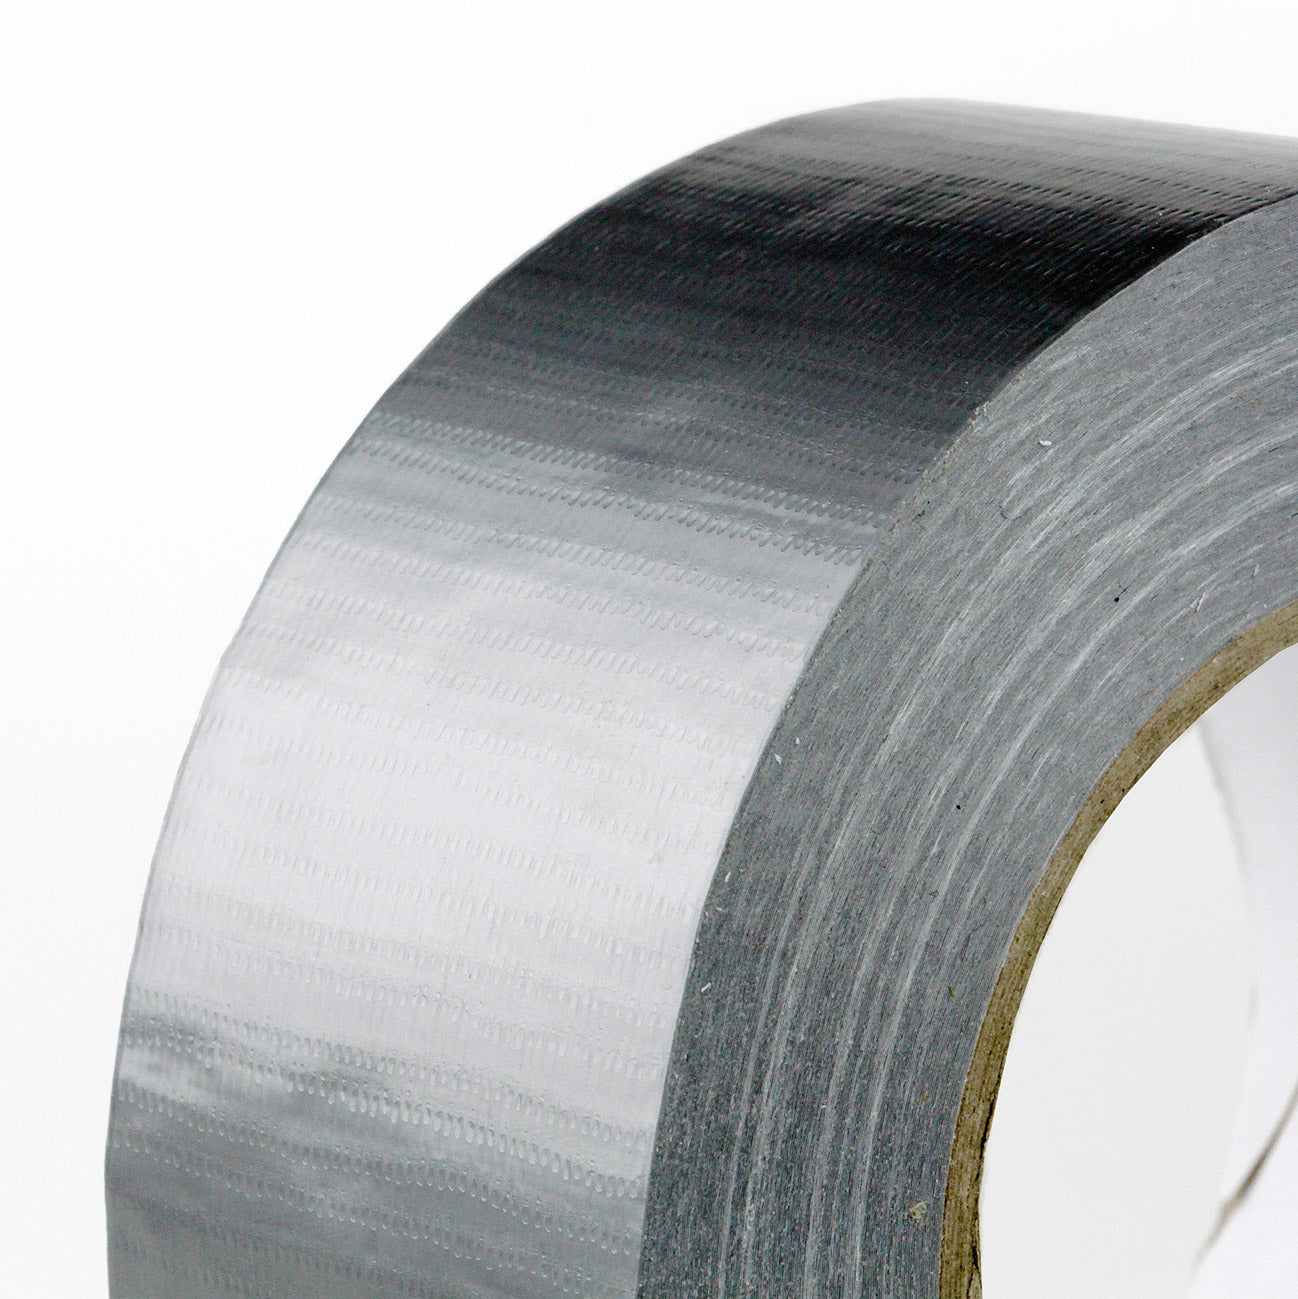 Furndiy Duct Tape, Heavy Duty Repair Tape, High Temperature Sealing, Patching HVAC, Insulation, Airproof